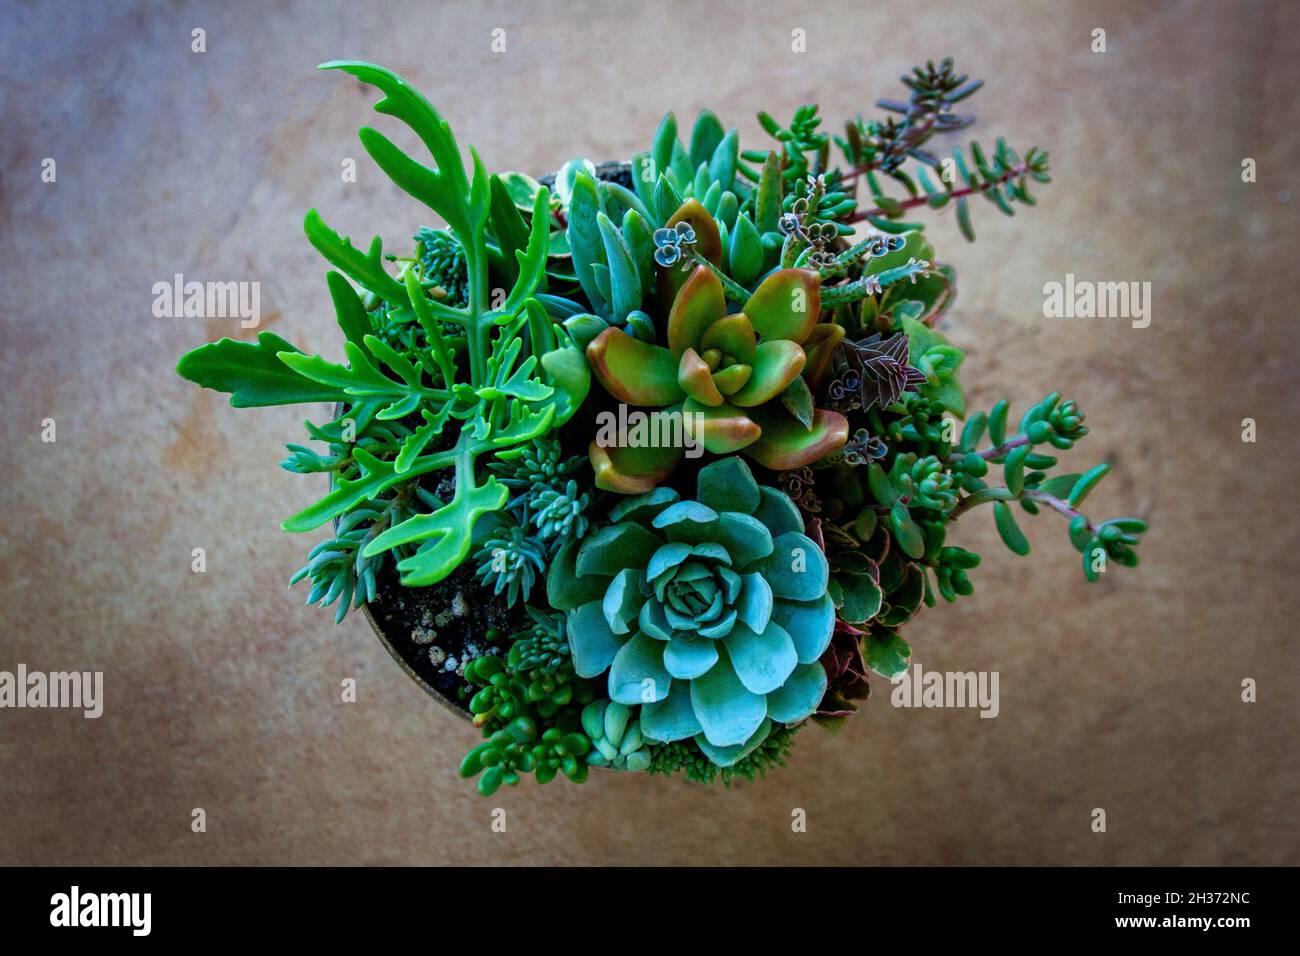 Succulent plants composition in round terrarium from a high angle view Stock Photo